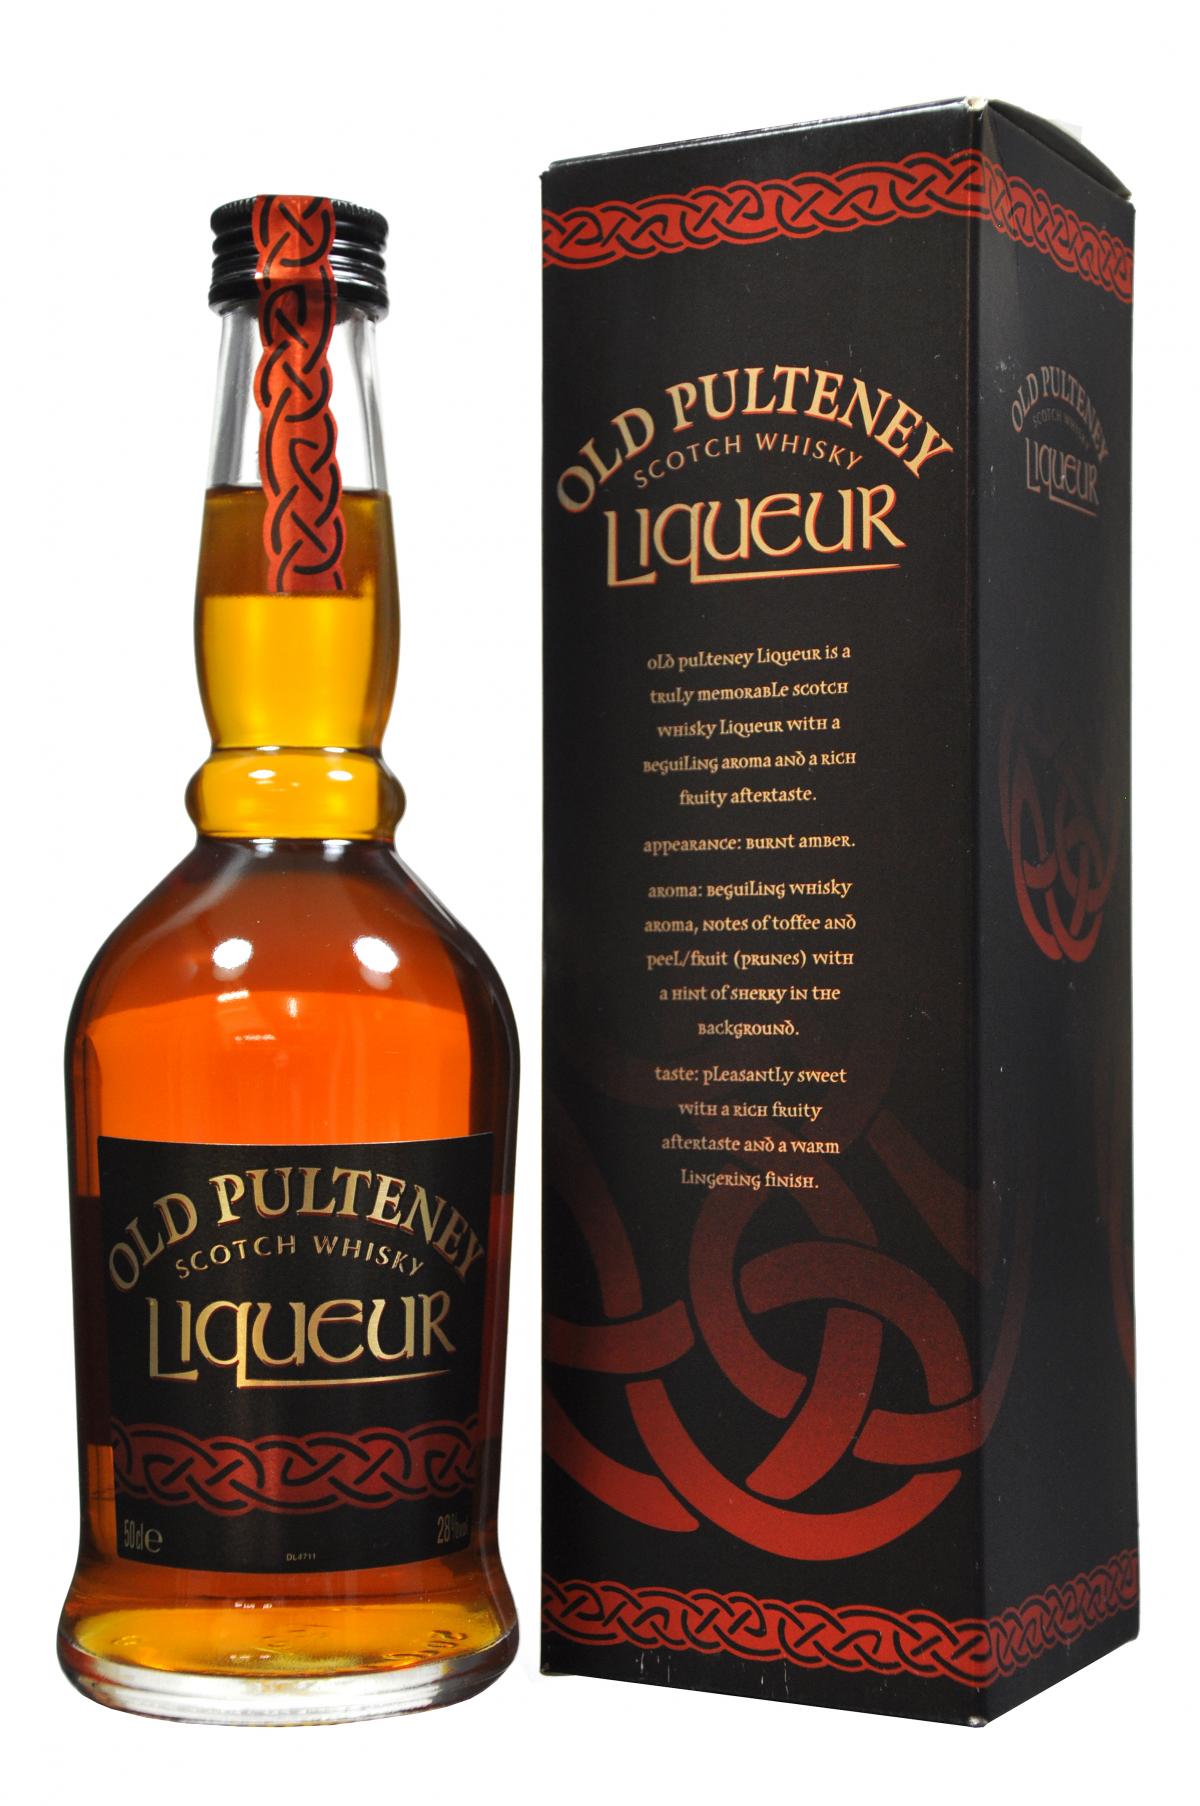 old pulteney scotch whisky liqueur